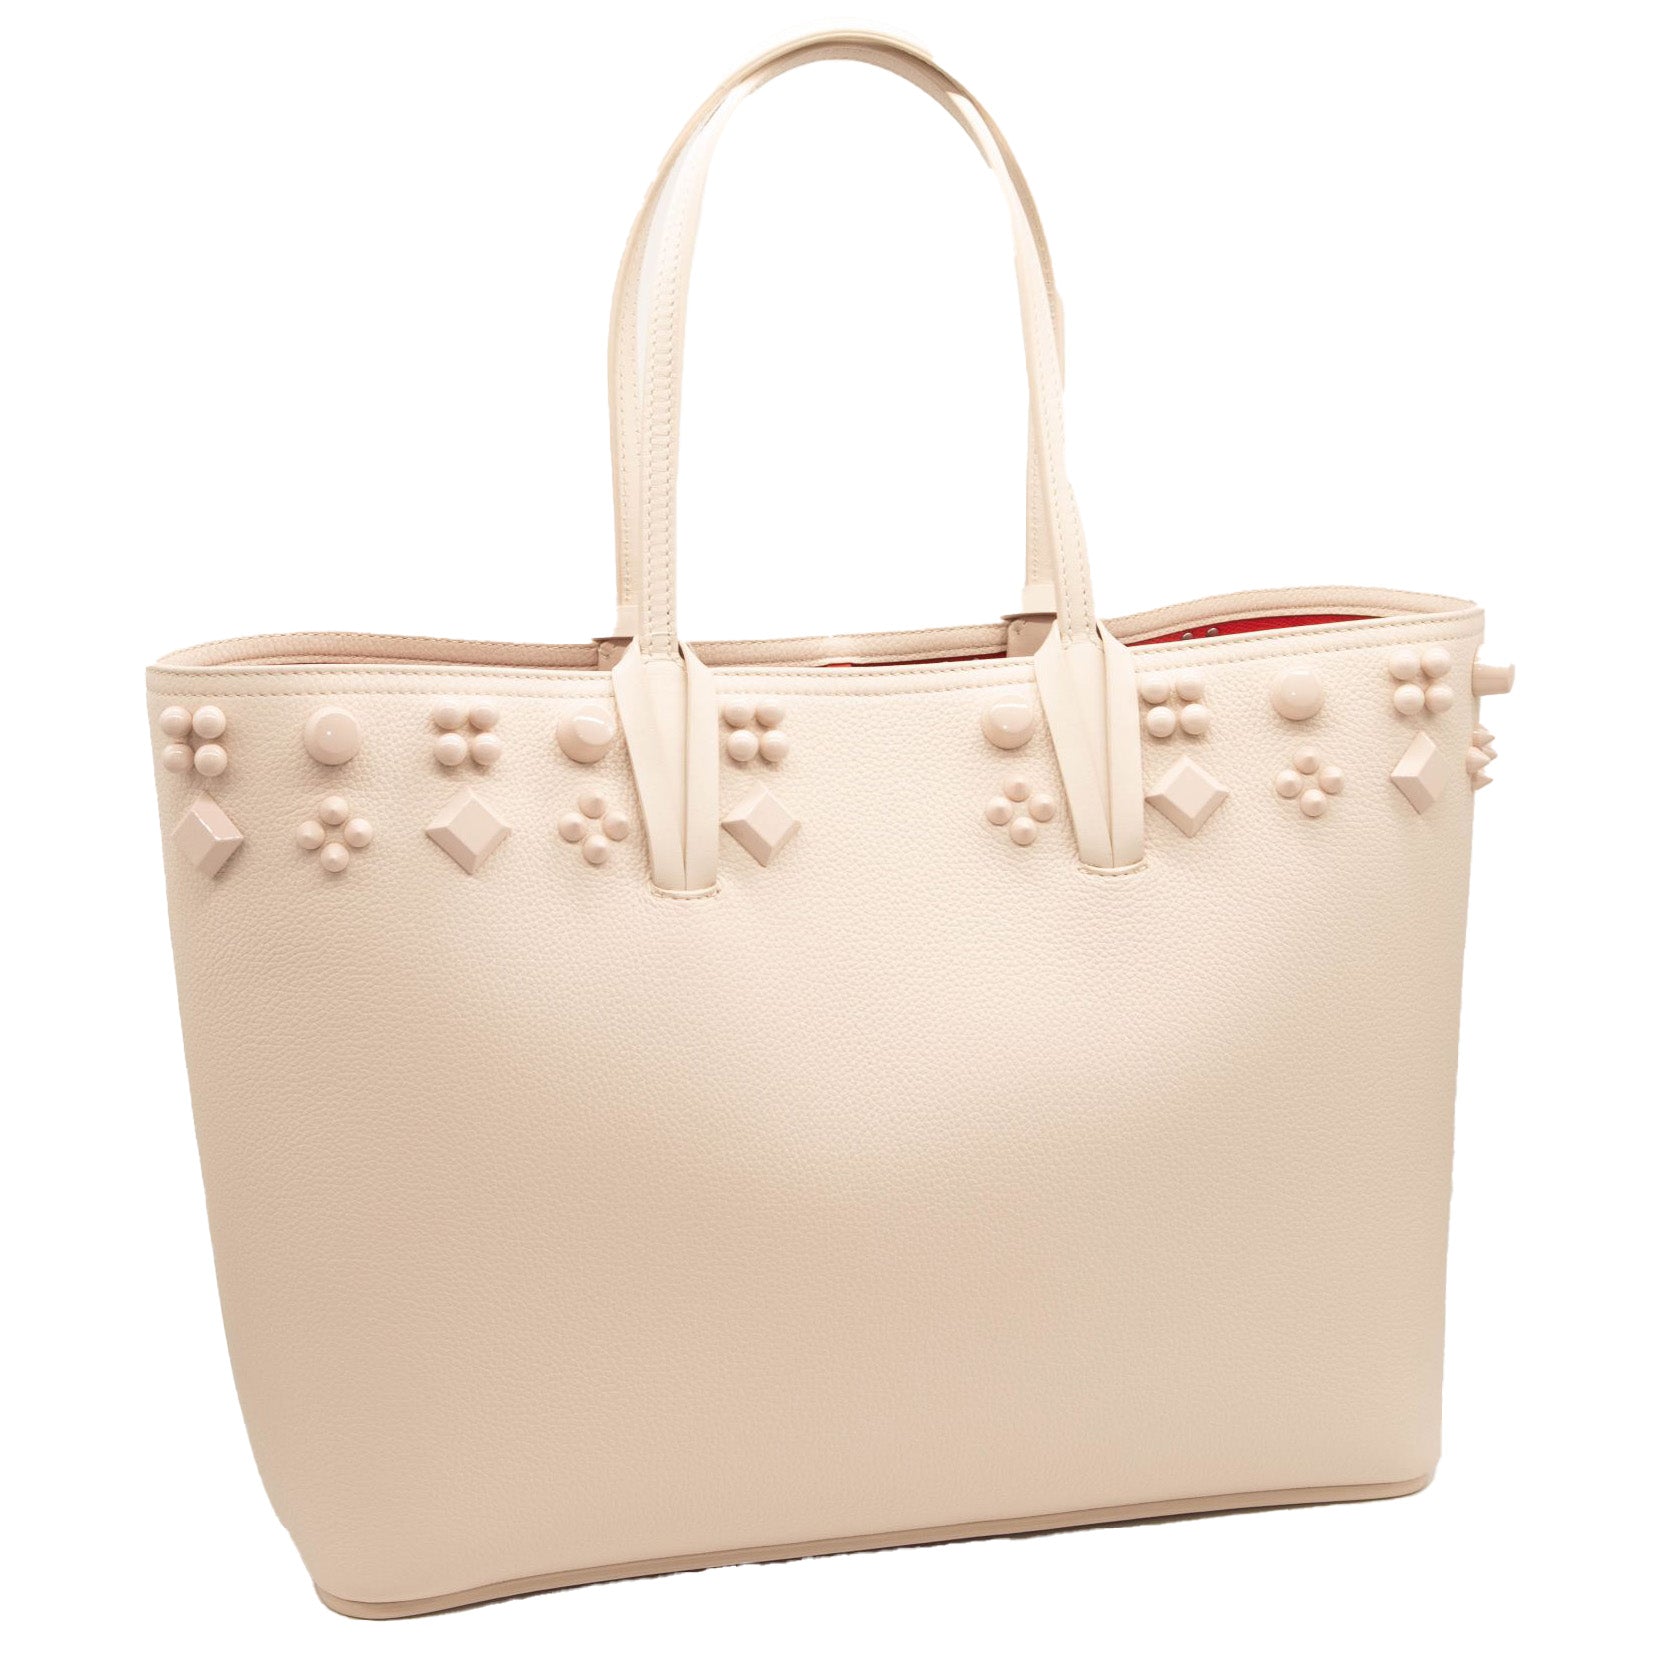 Christian Louboutin Men's Studded Leather Tote